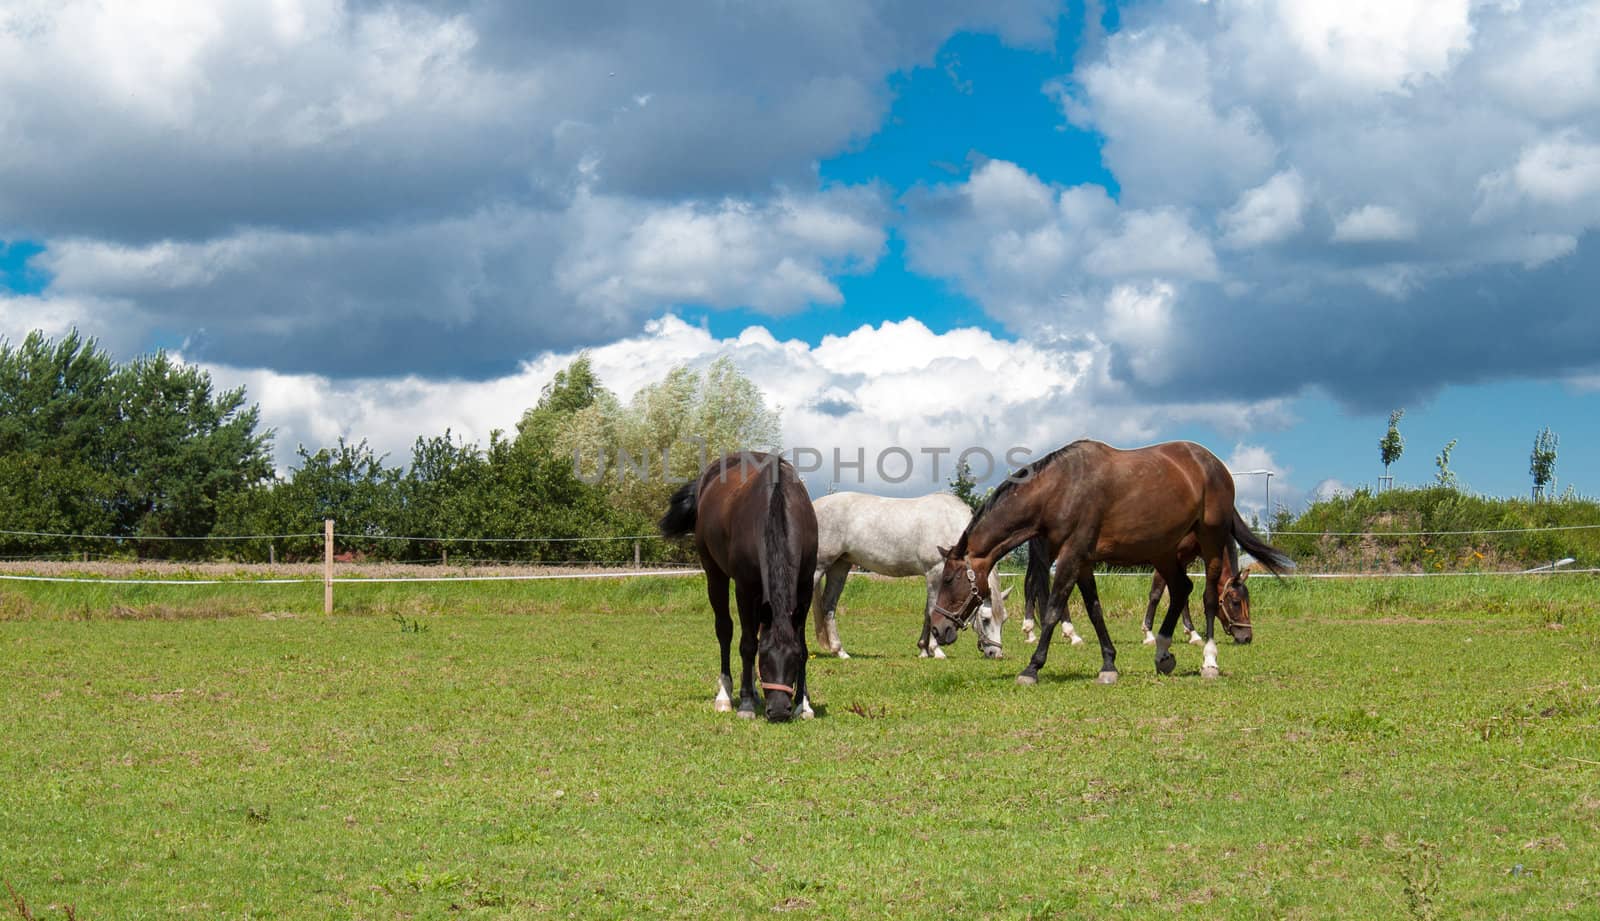 grazing horses on grass field with dramatic blue sky